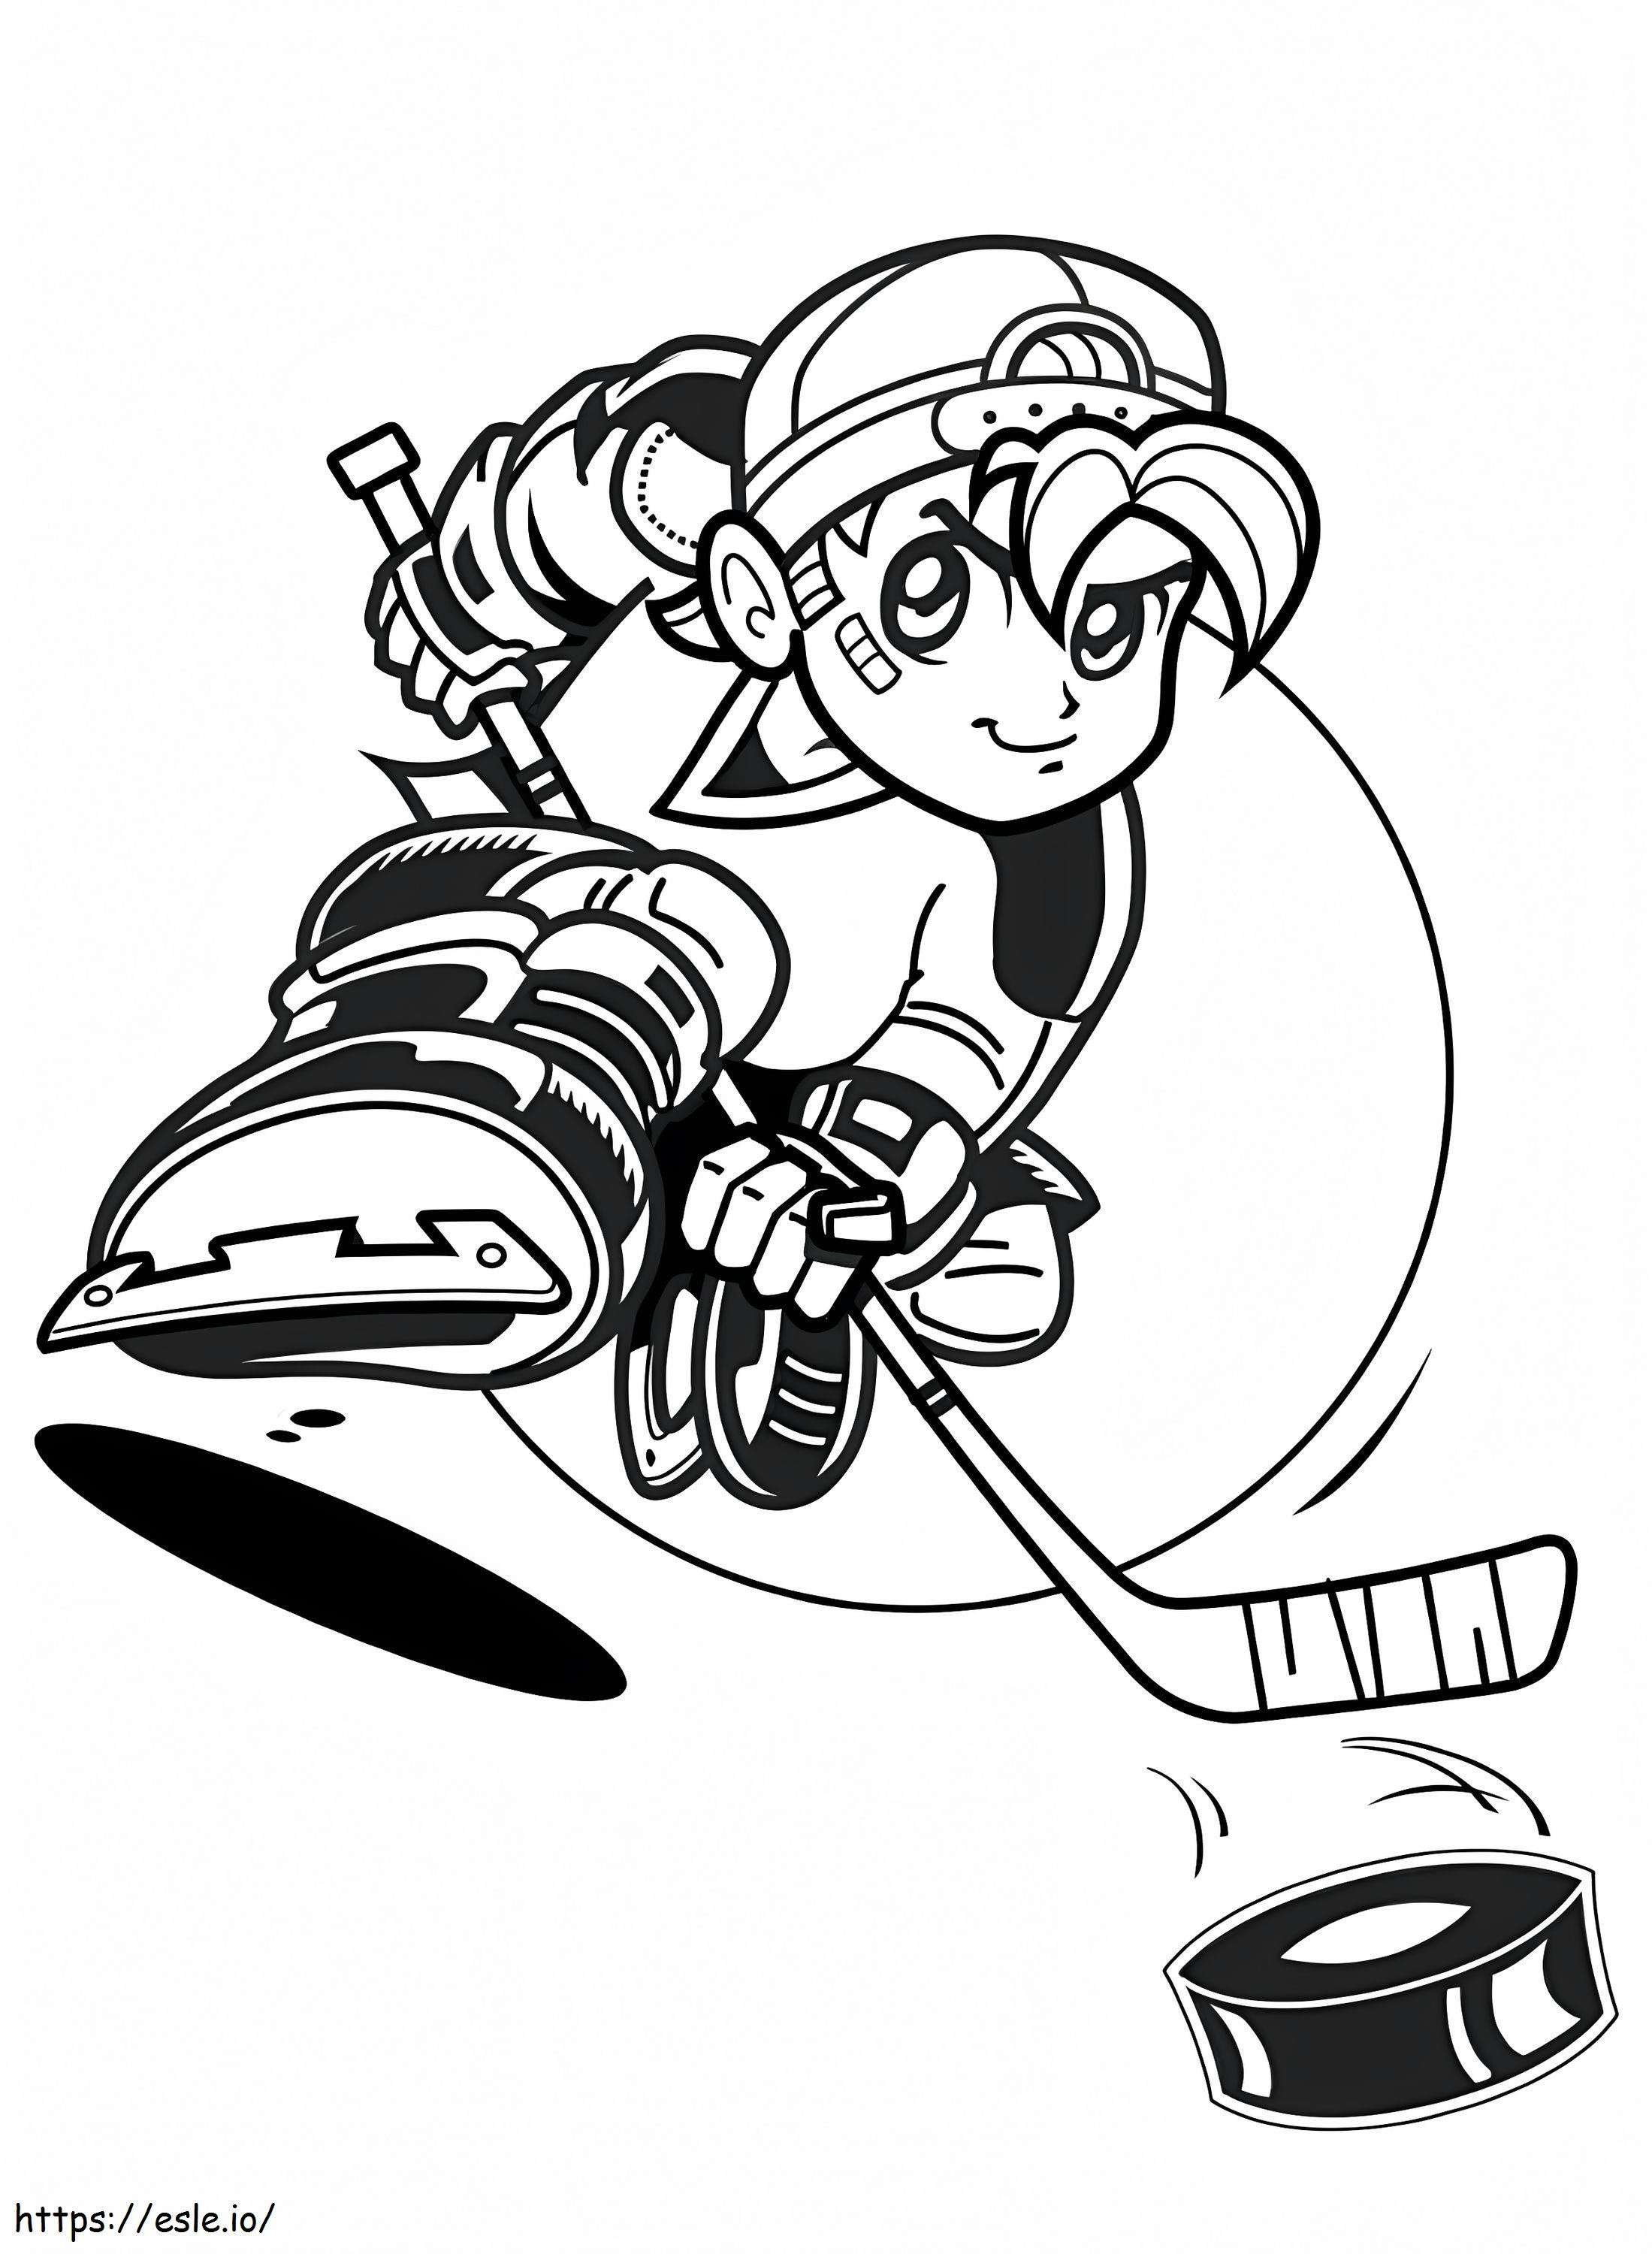 Great Hockey Players coloring page